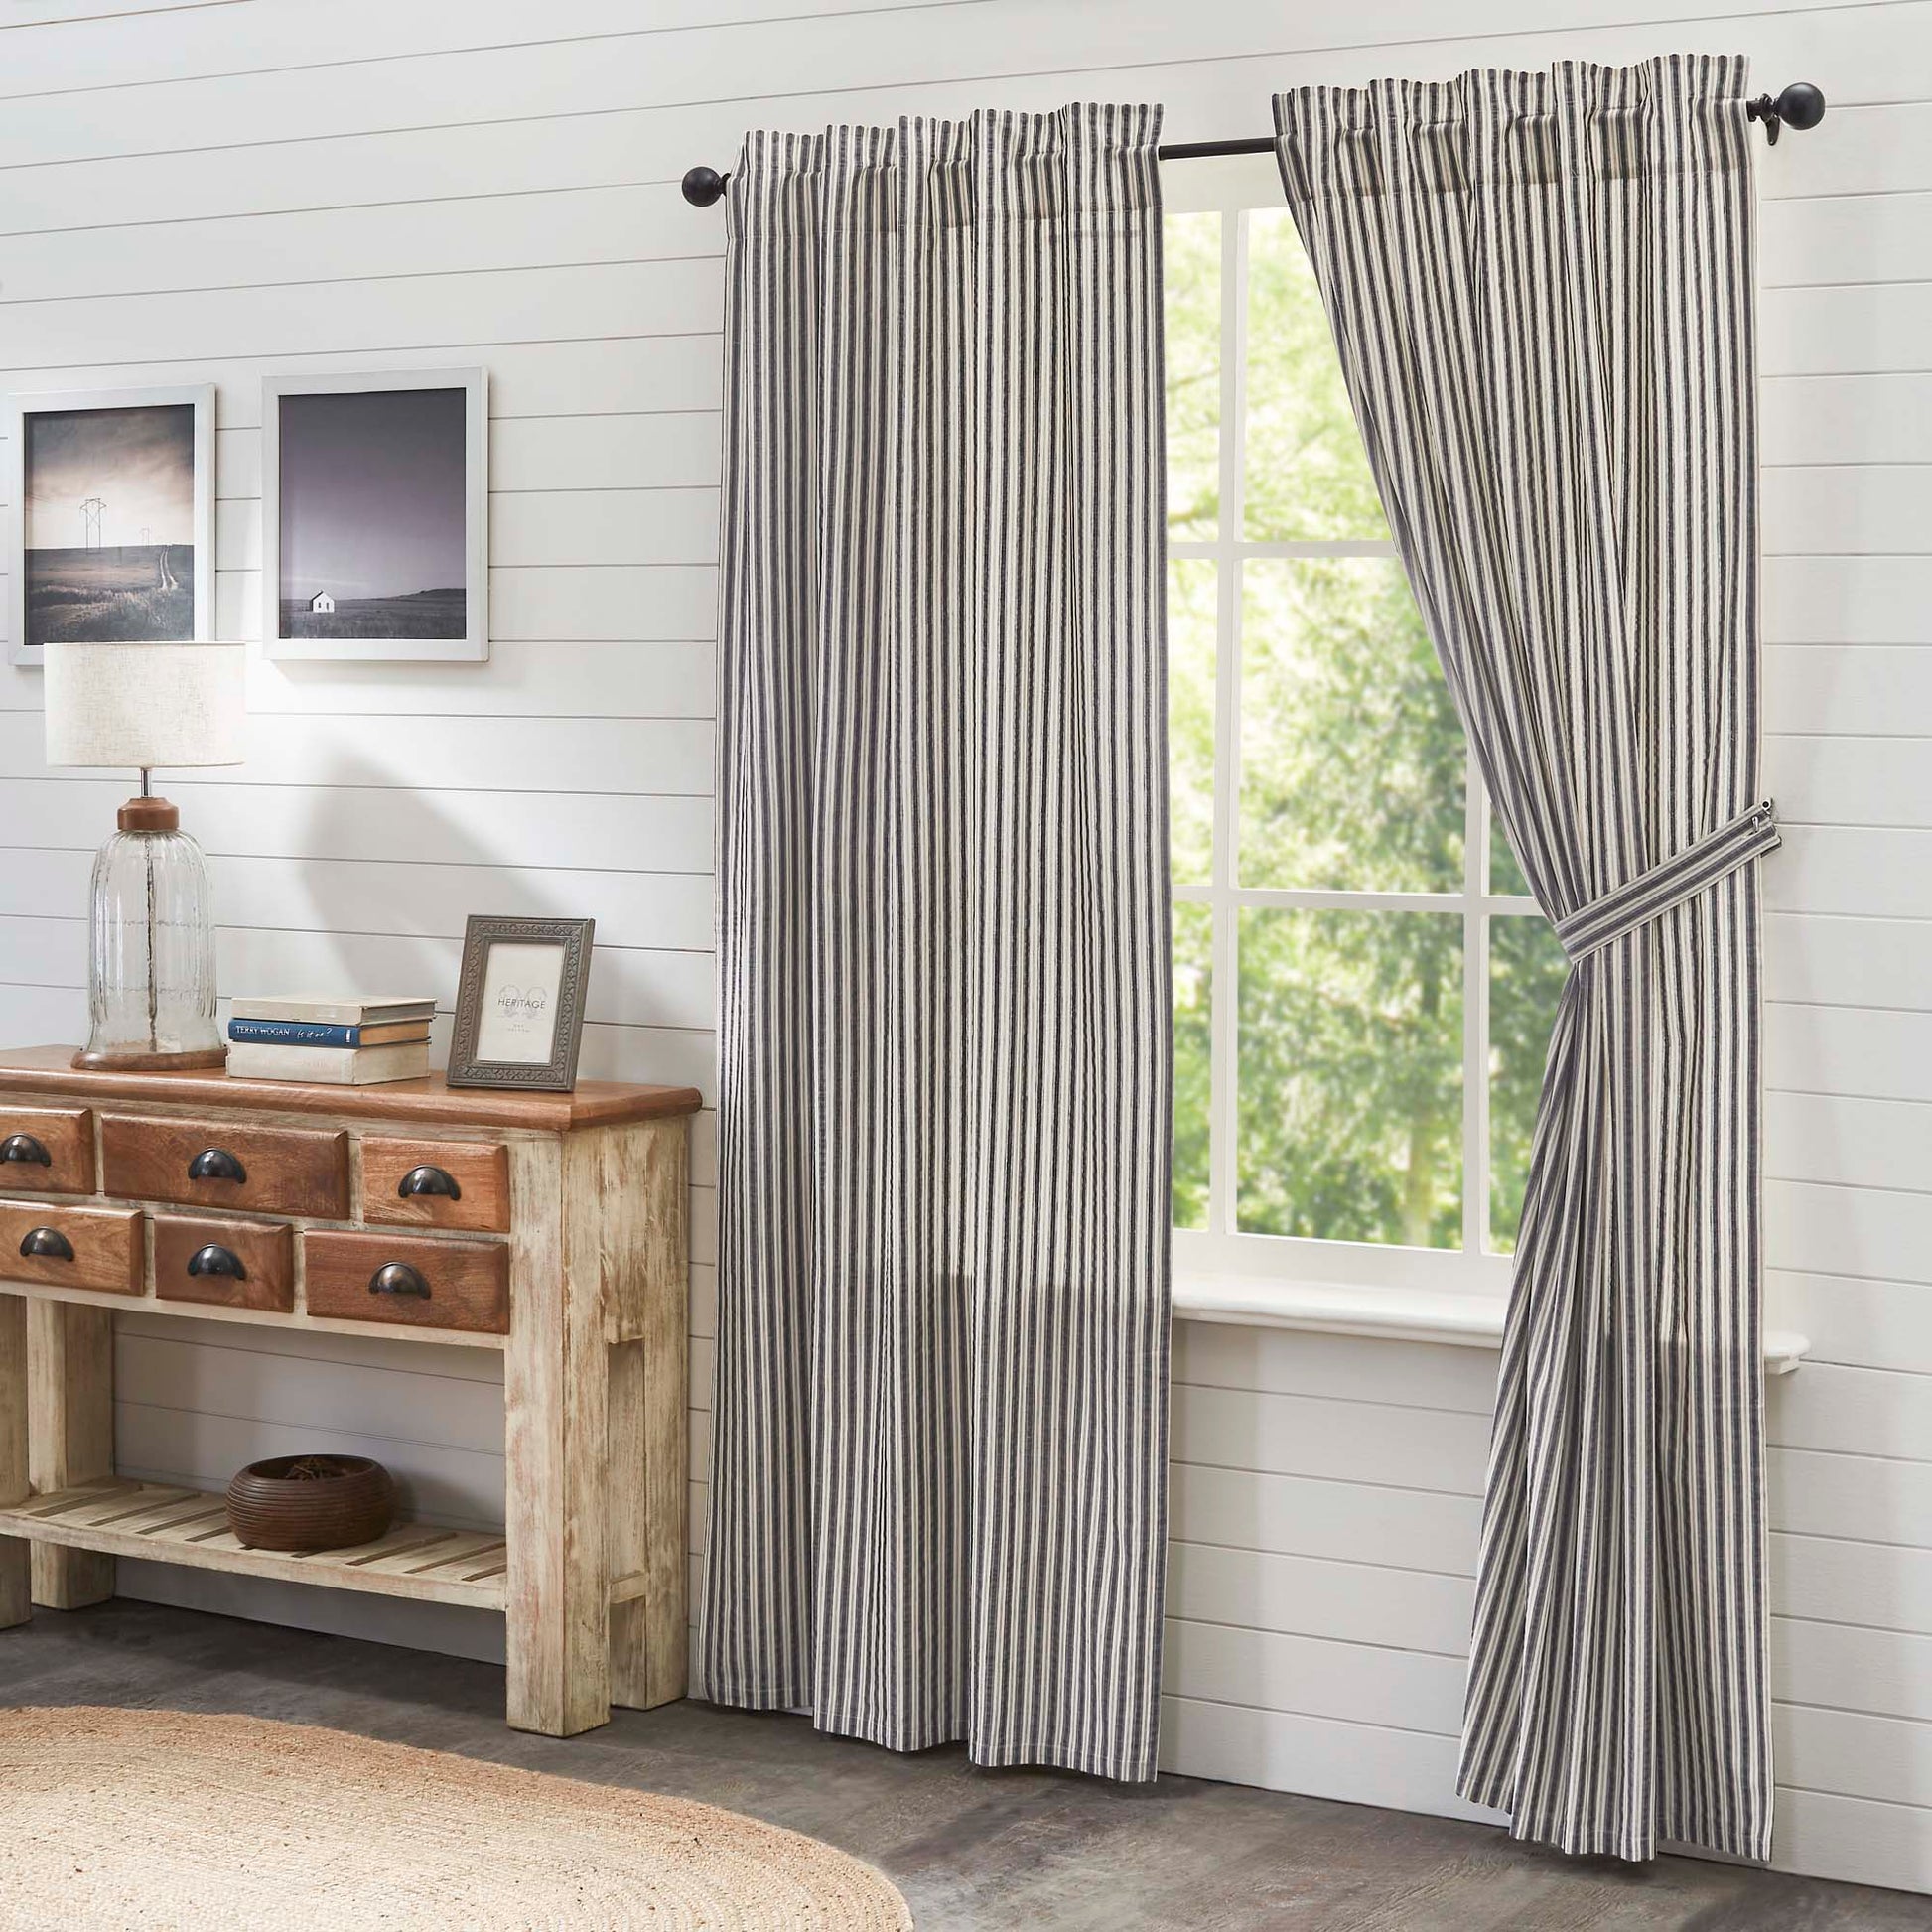 Striped Farmhouse Roman Shade Add On (Add this exact fabric to